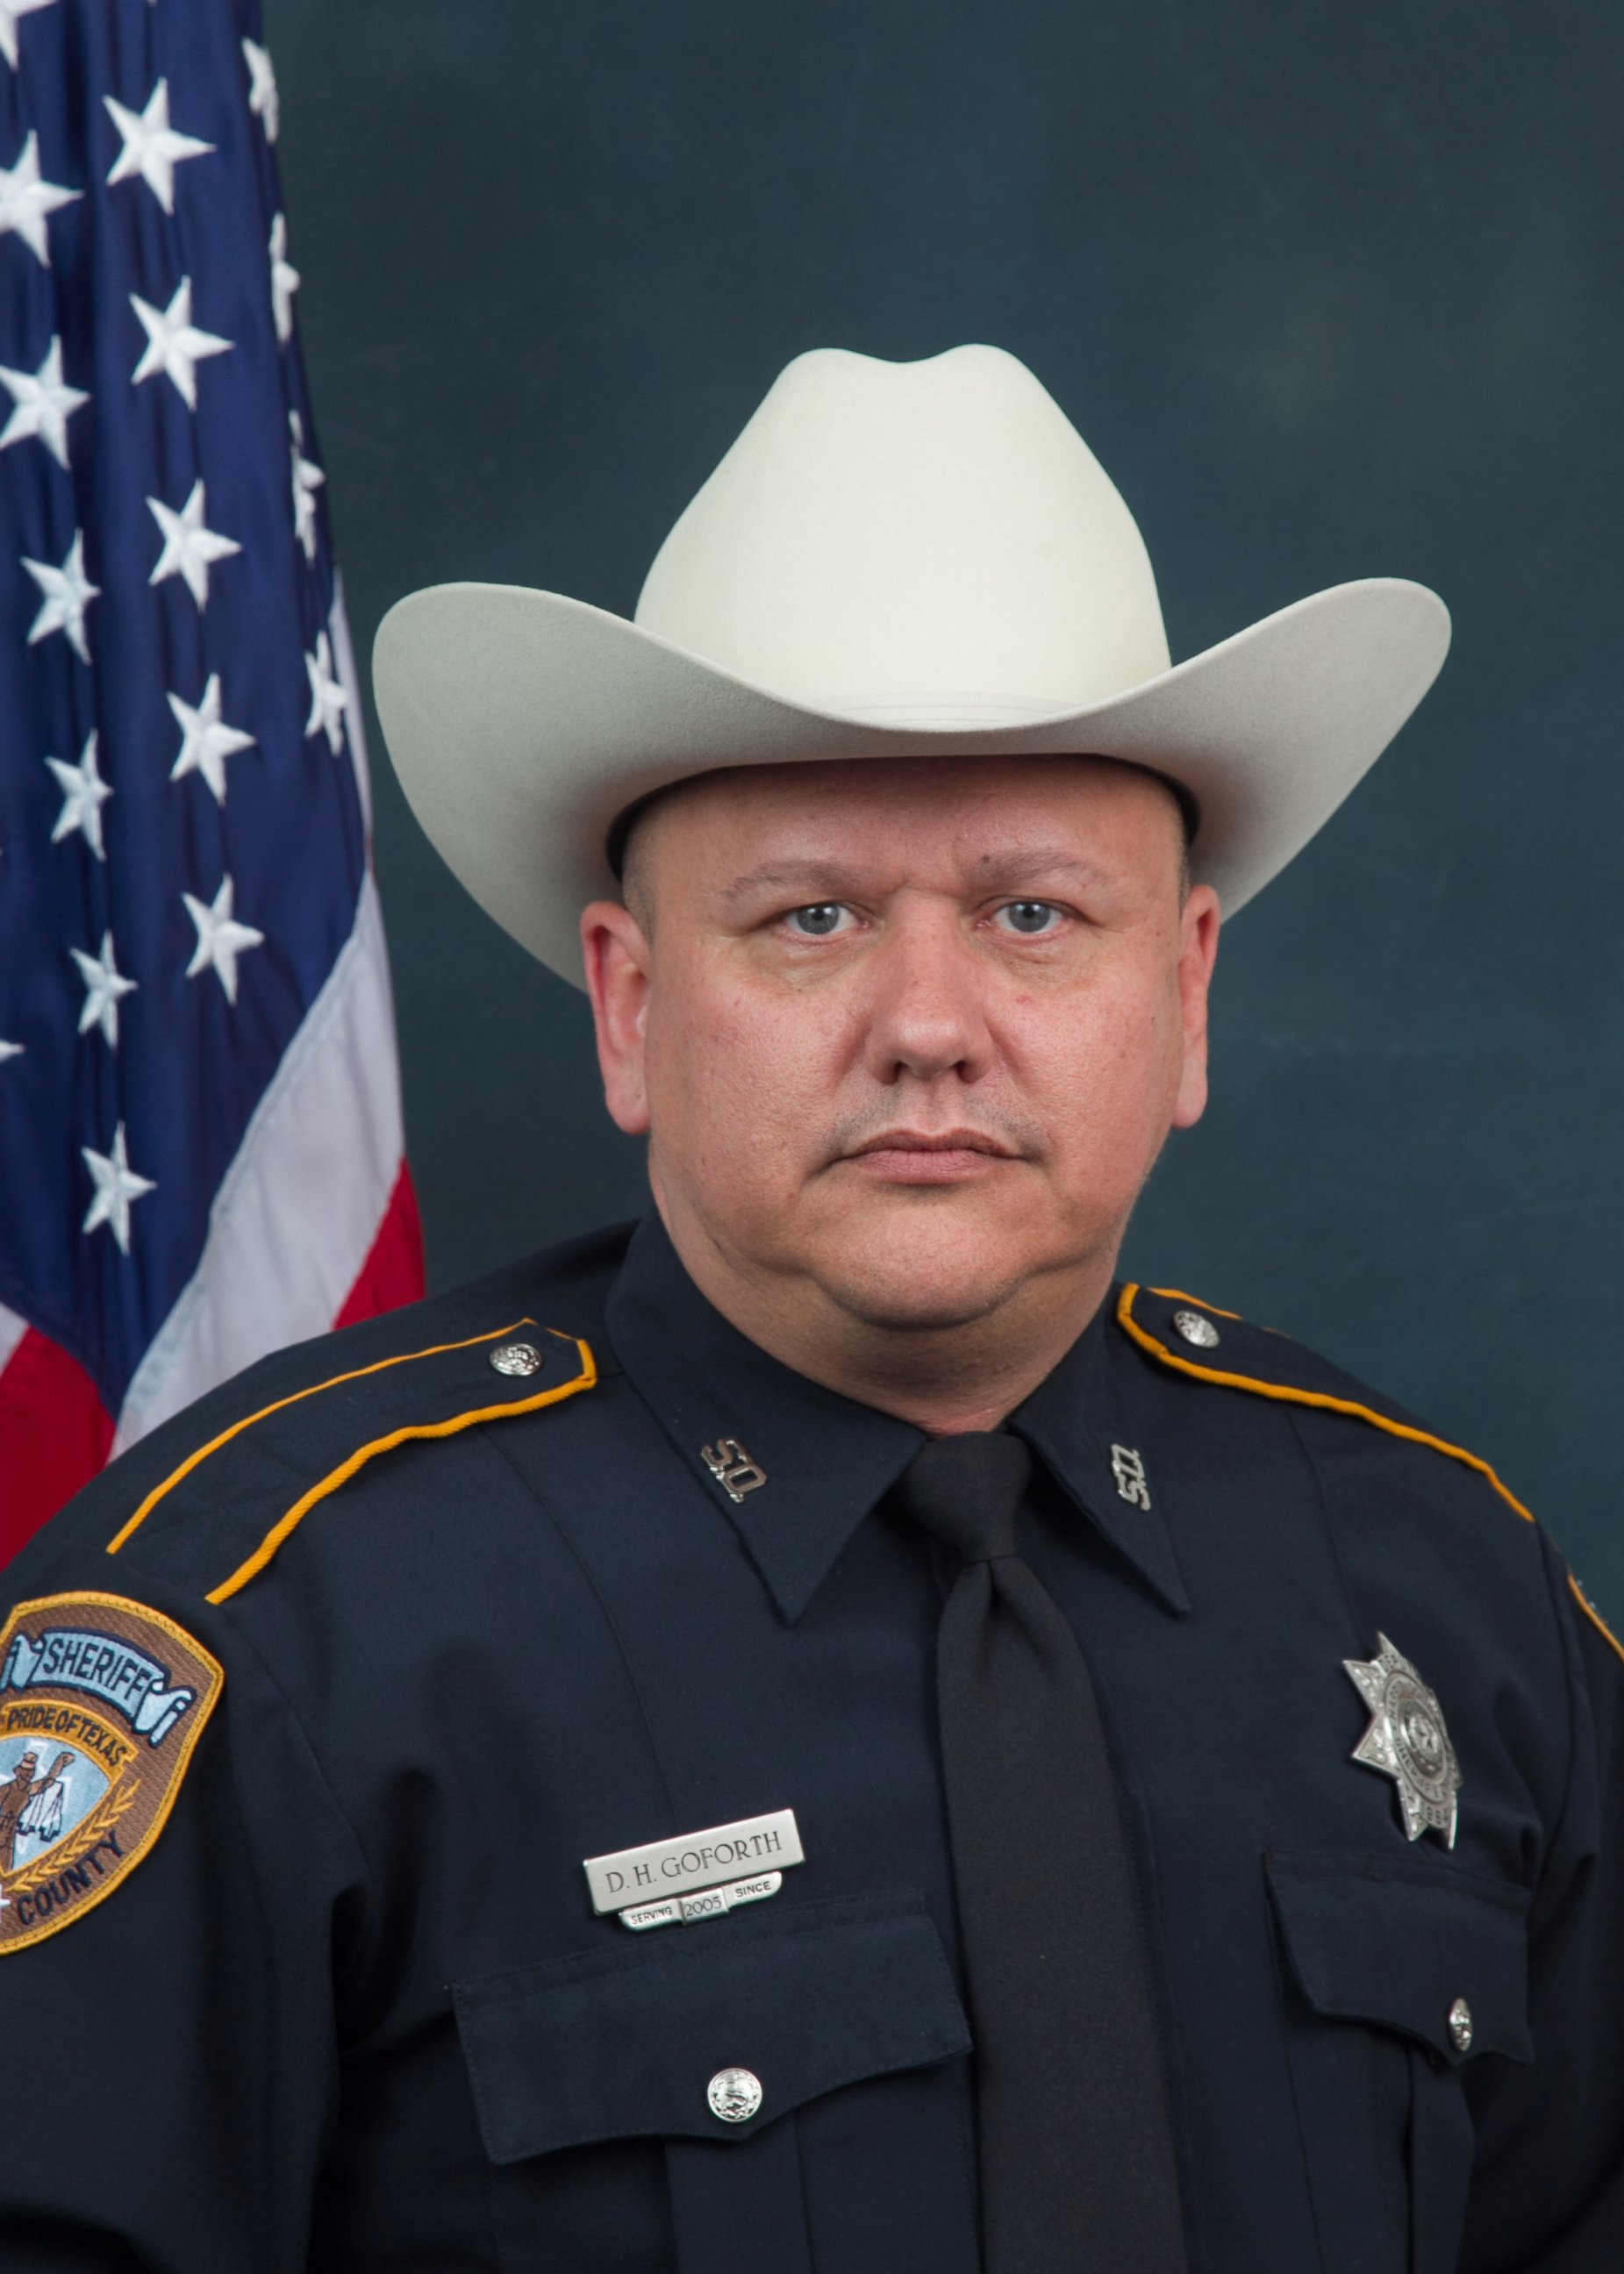 PHOTO: This undated photo provided by the Harris County Sheriff's Office shows sheriff's deputy Darren Goforth who was fatally shot Friday, Aug. 28, 2015.